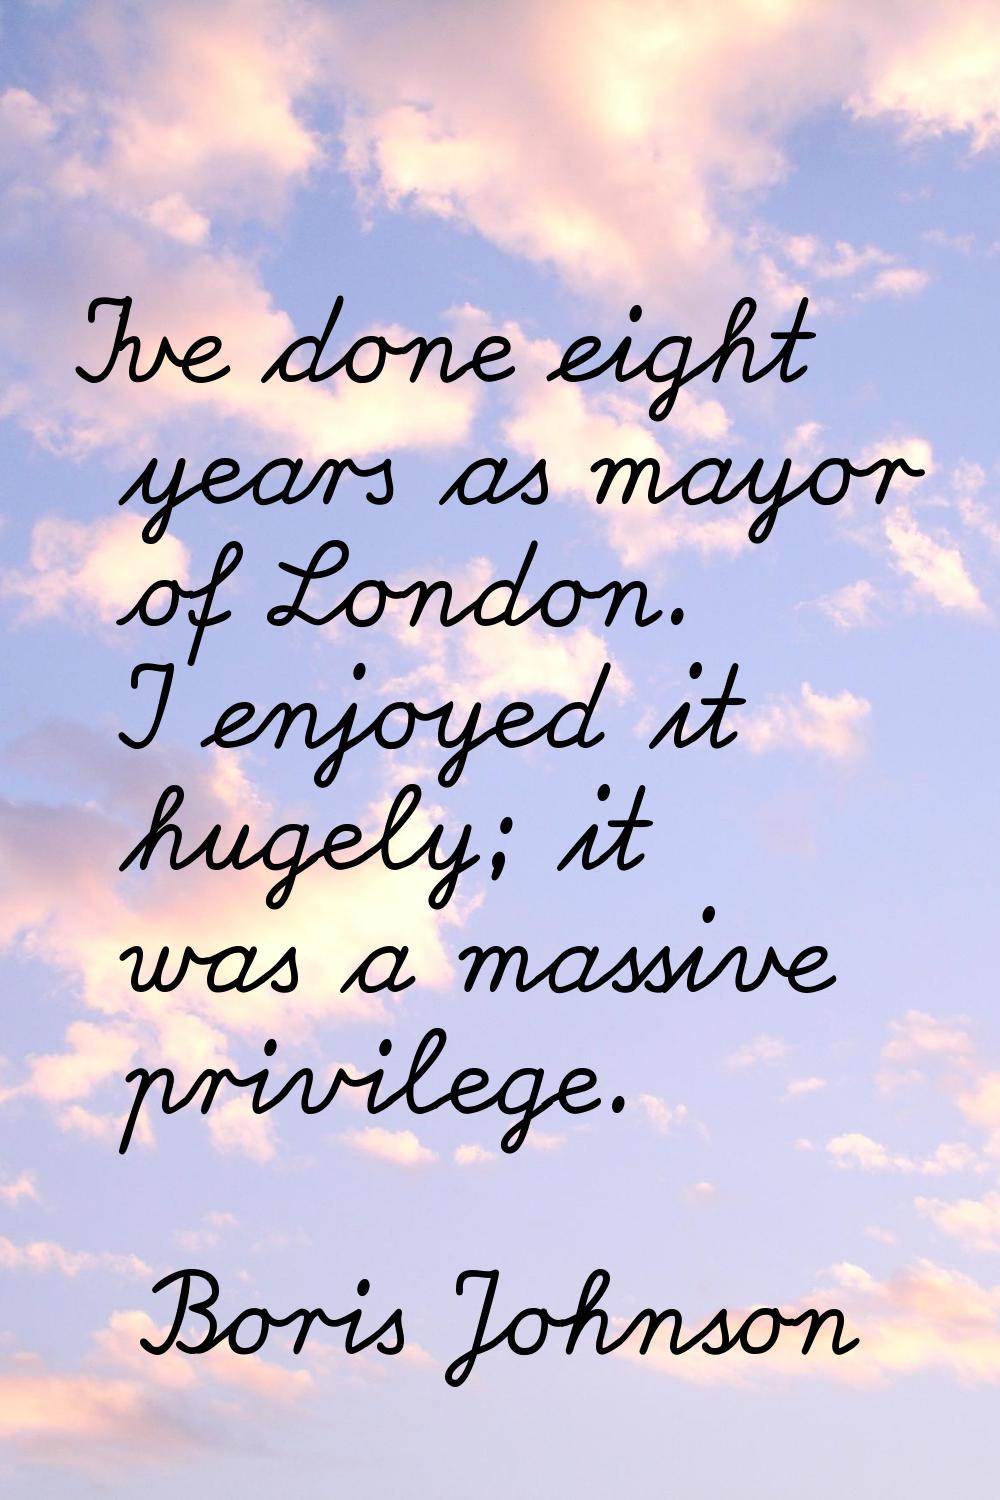 I've done eight years as mayor of London. I enjoyed it hugely; it was a massive privilege.